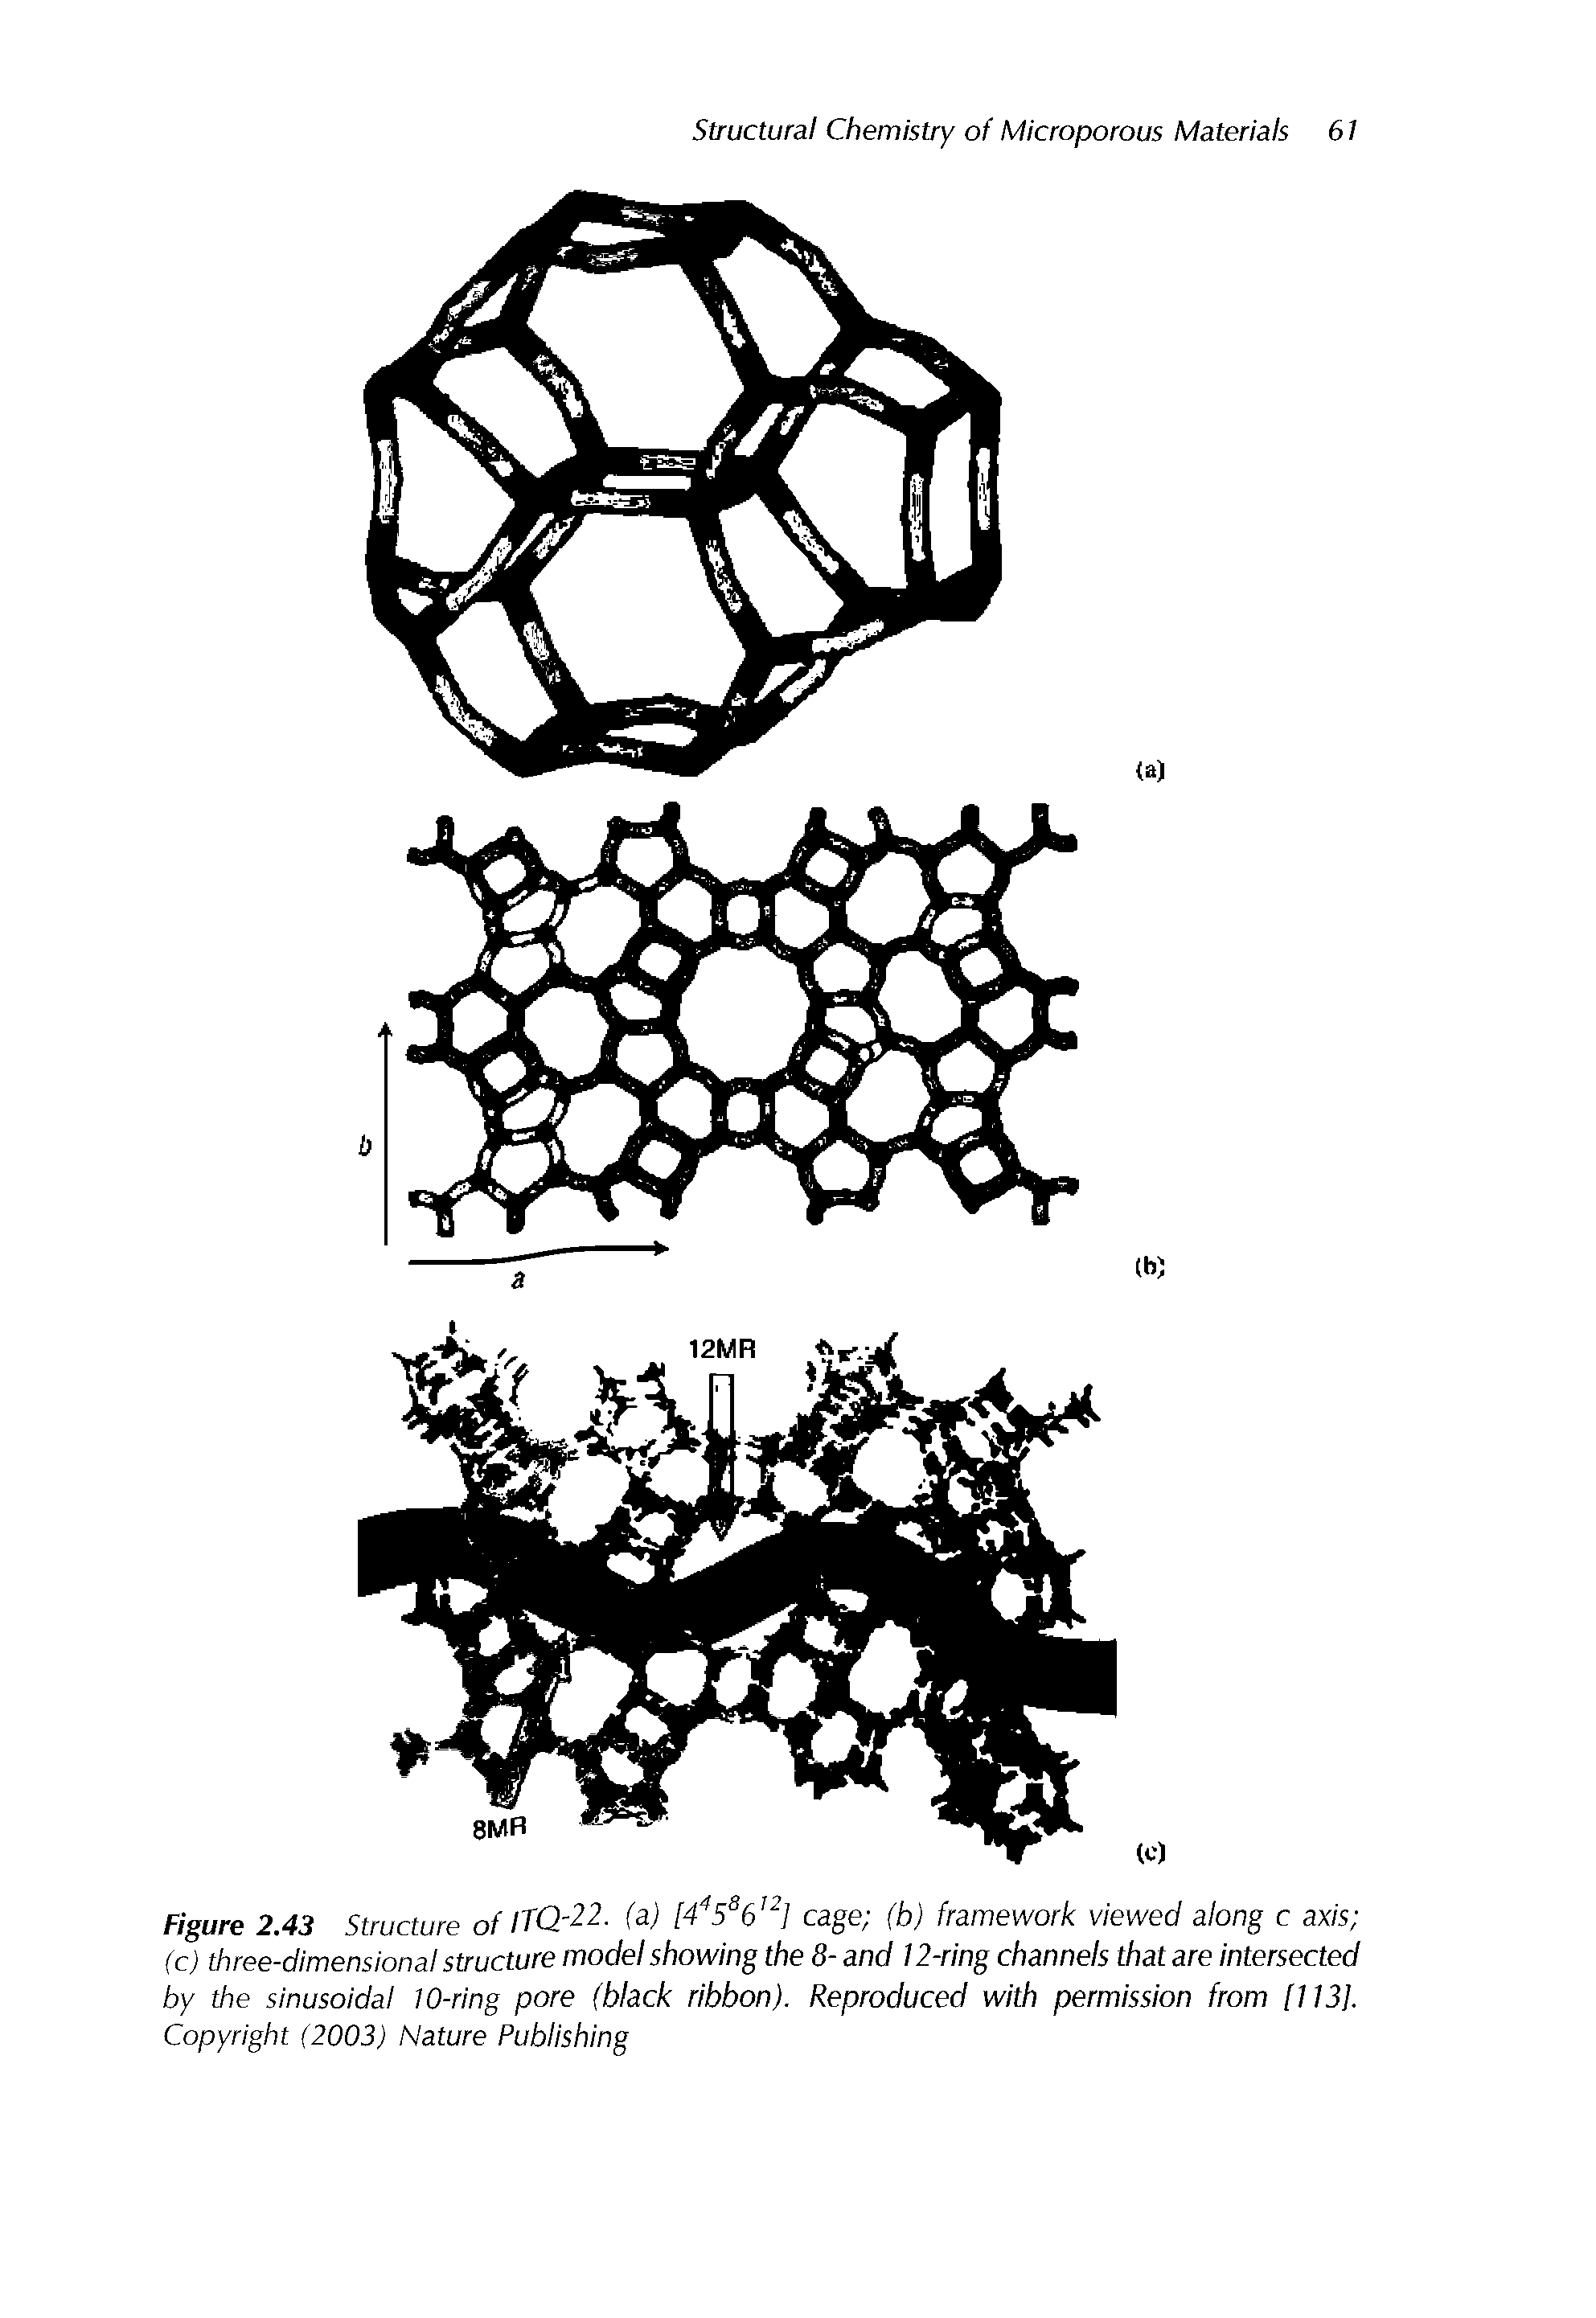 Figure 2.43 Structure of lTQ-22. (a) [4458612] cage (b) framework viewed along c axis (c) three-dimensional structure model showing the 8- and 12-ring channels that are intersected by the sinusoidal 10-ring pore (black ribbon). Reproduced with permission from [ 113], Copyright (2003) Nature Publishing...